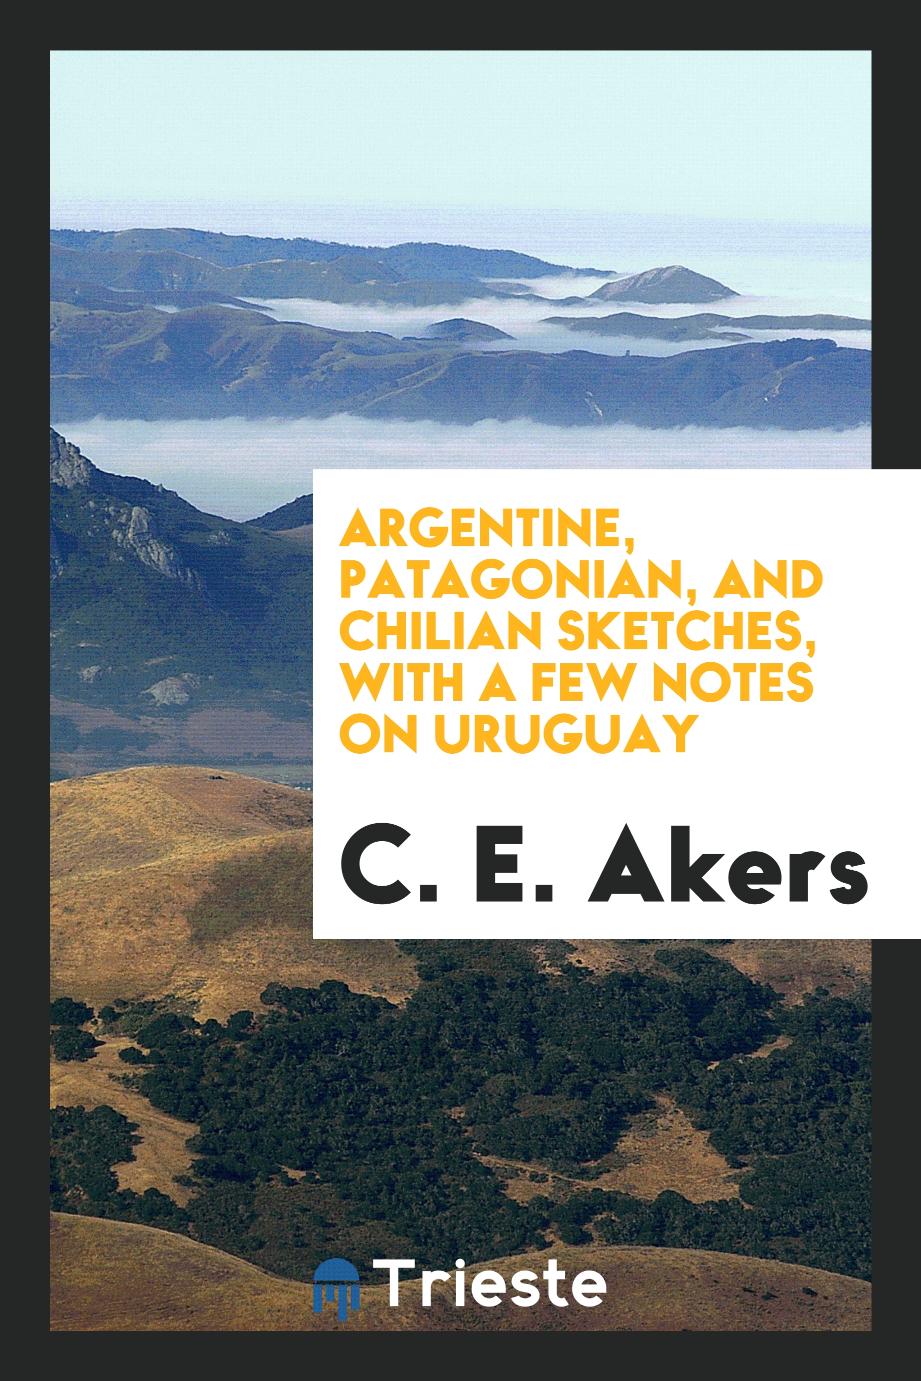 Argentine, Patagonian, and Chilian sketches, with a few notes on Uruguay